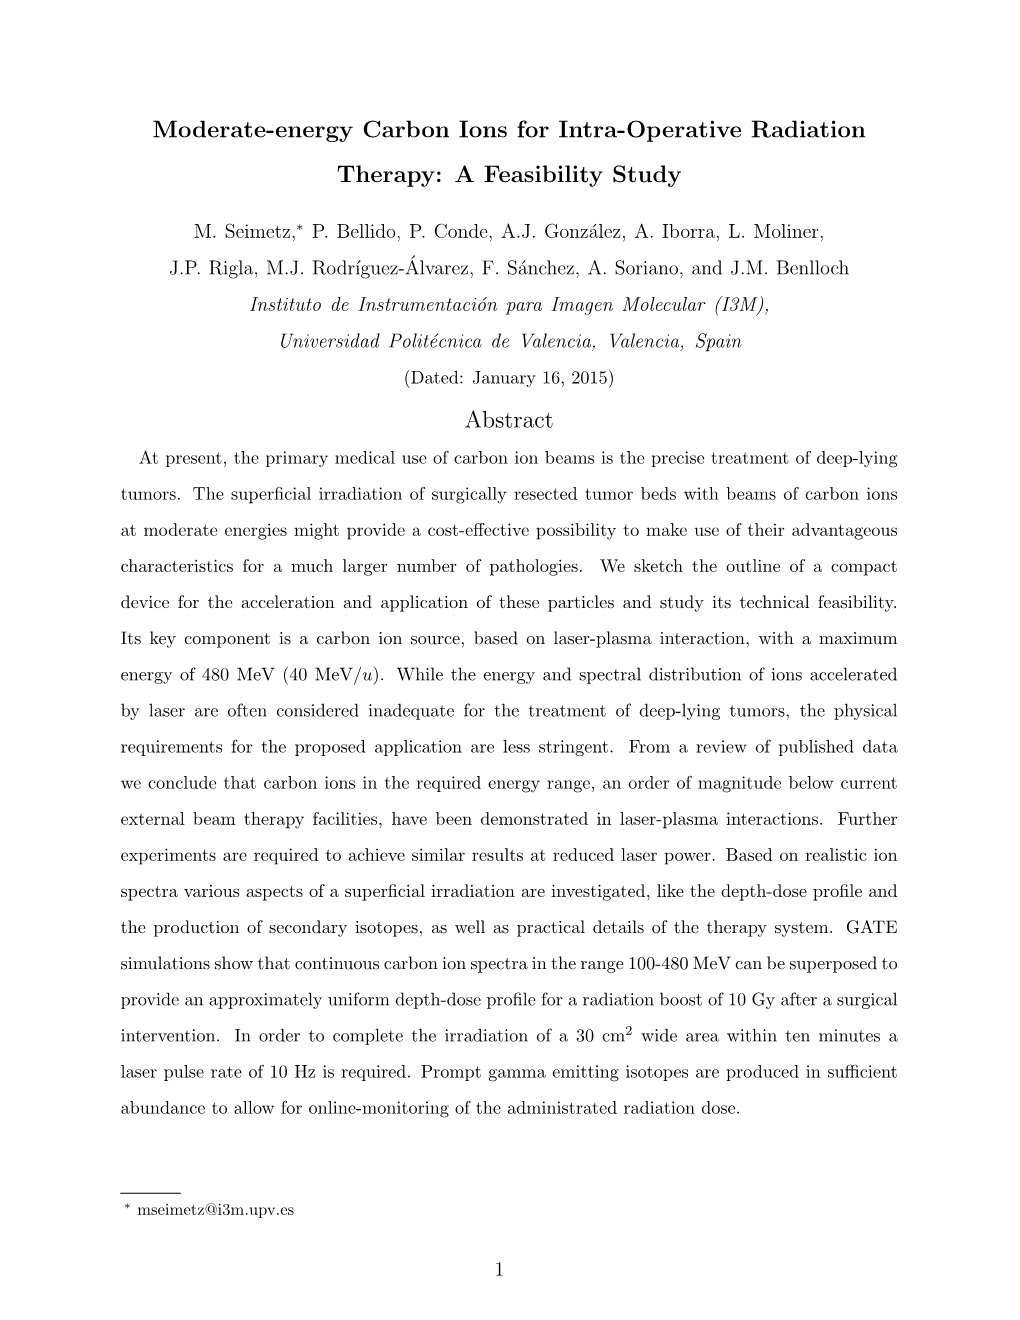 Carbon Ions for Intra-Operative Radiation Therapy: a Feasibility Study